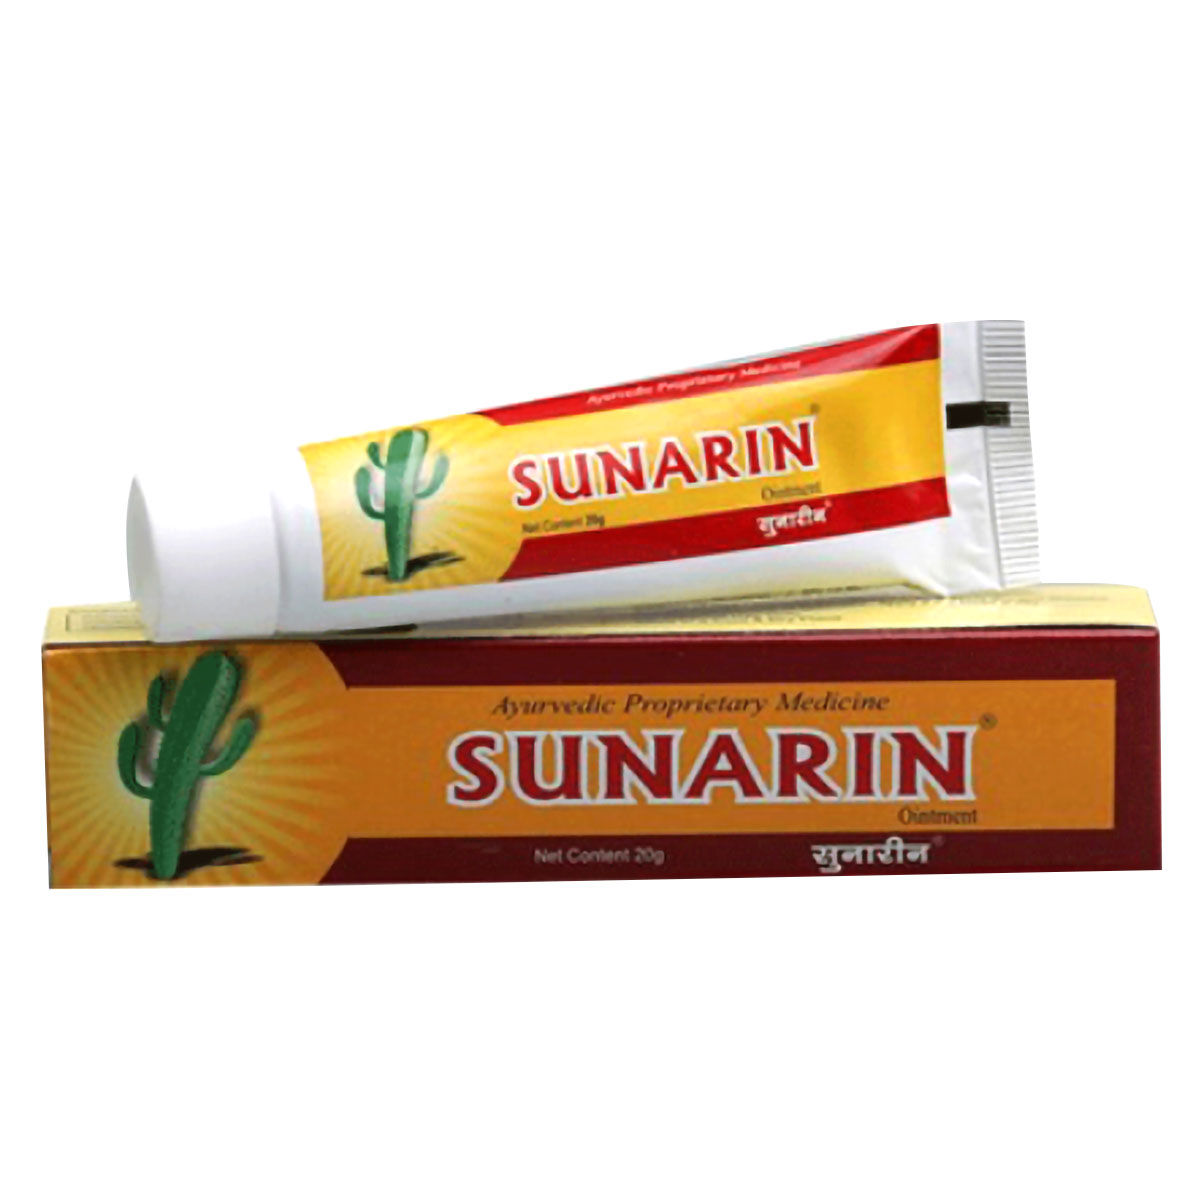 Buy Sunarin Ointment, 1 Count Online